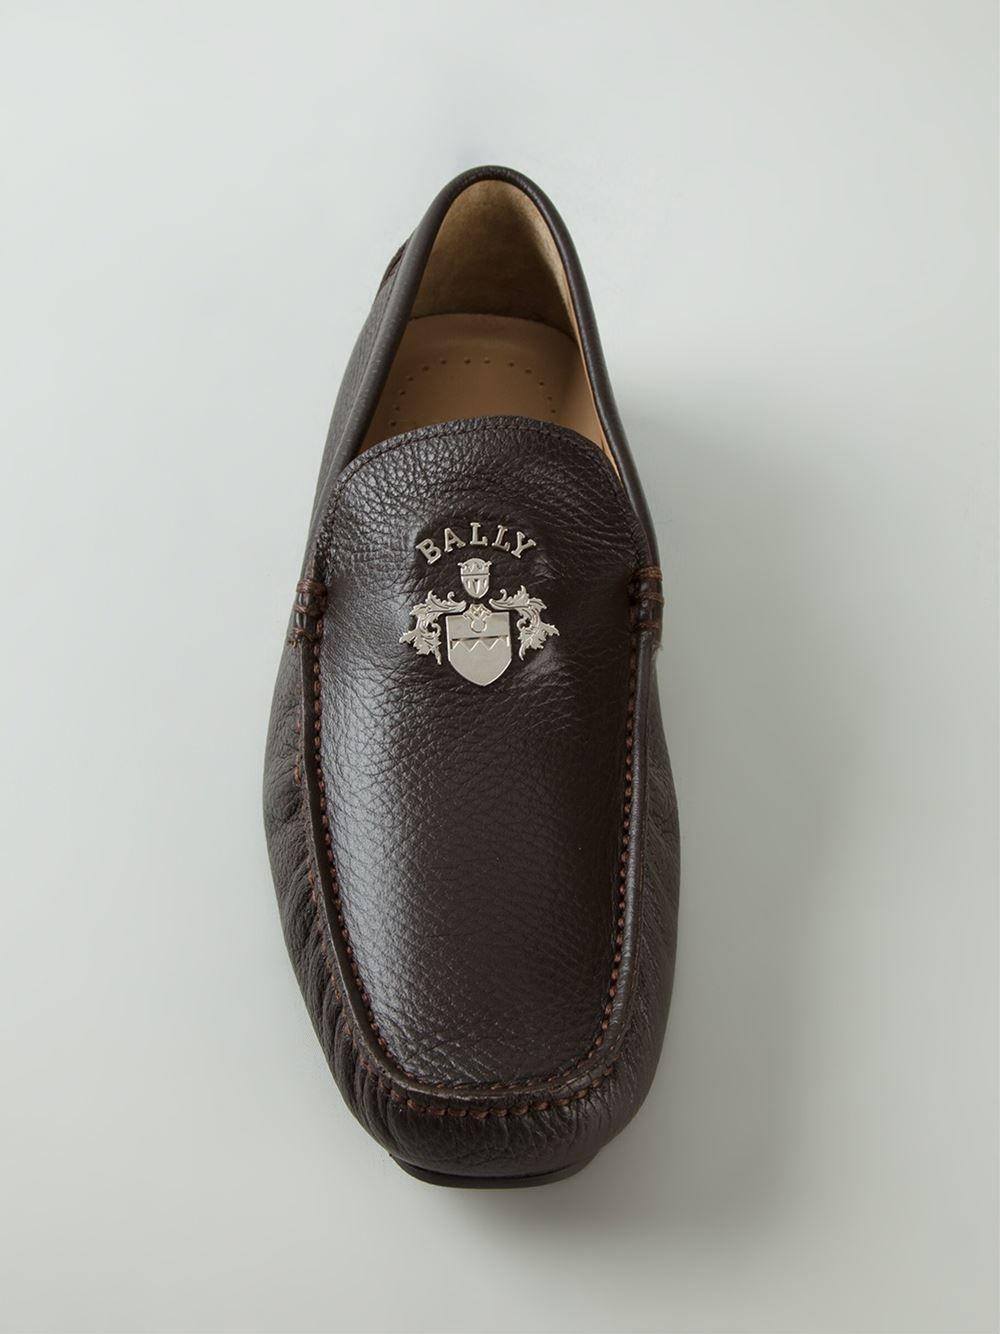 Bally Shoes Logo - Lyst - Bally Driving Shoes in Brown for Men